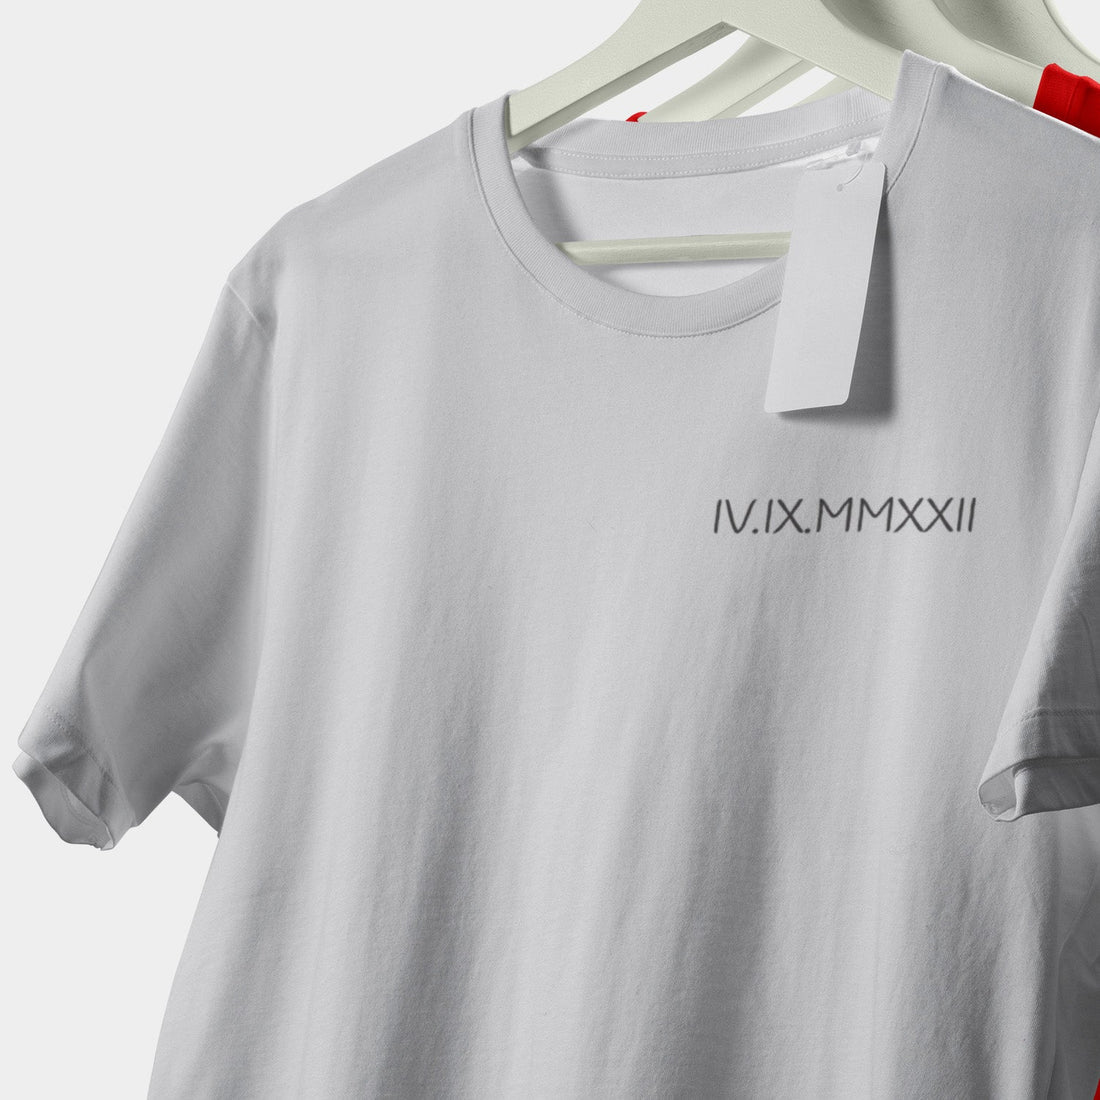 Personalized T-shirt Embroidered With Roman Numbers And Initial